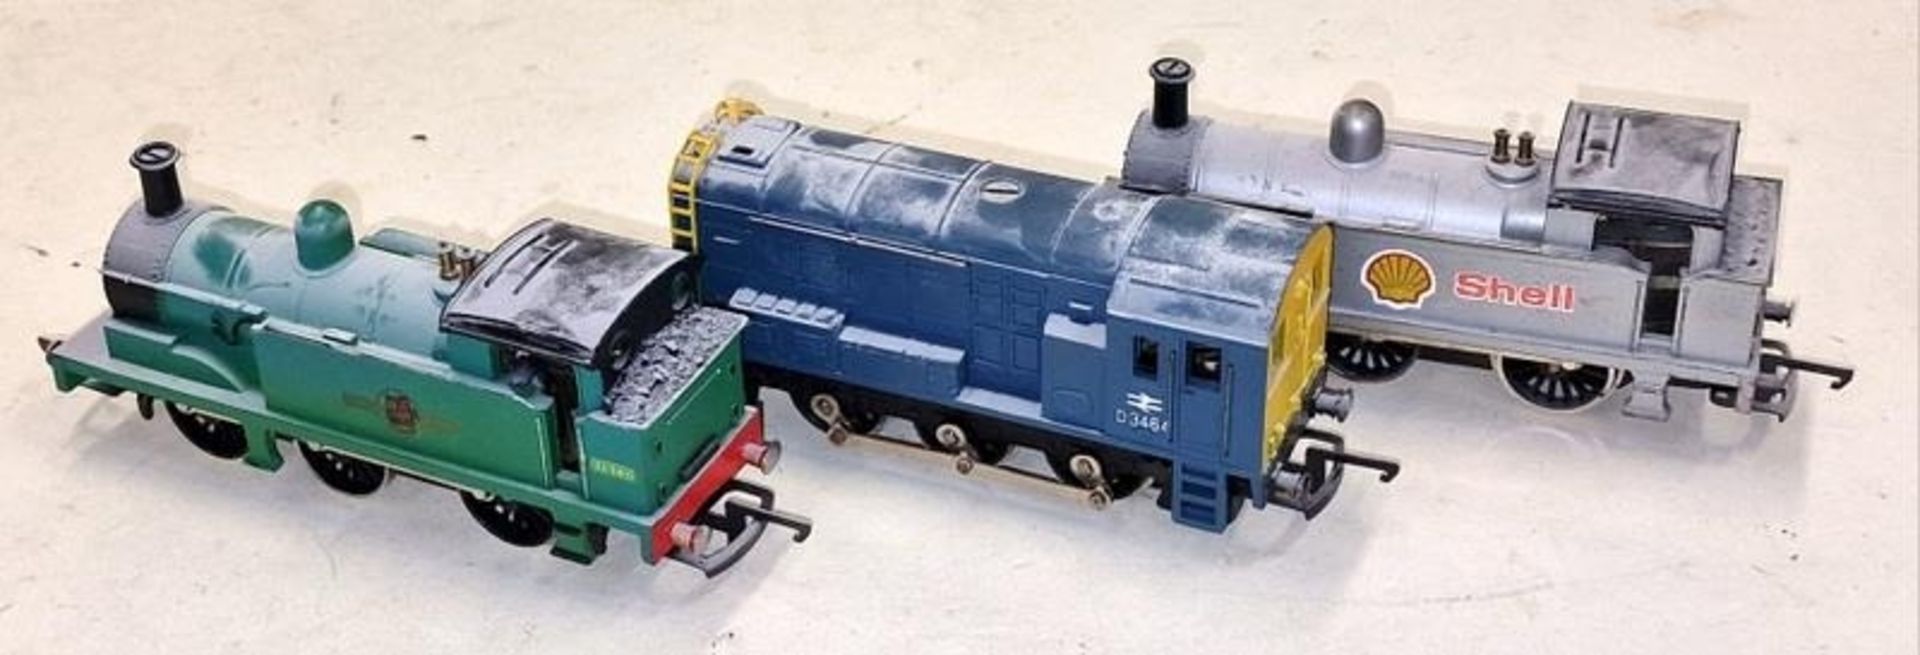 Three OO Guage to include, Shell, D3464, and British railway 31340 LMS 7420 - previously displayed - Image 3 of 4